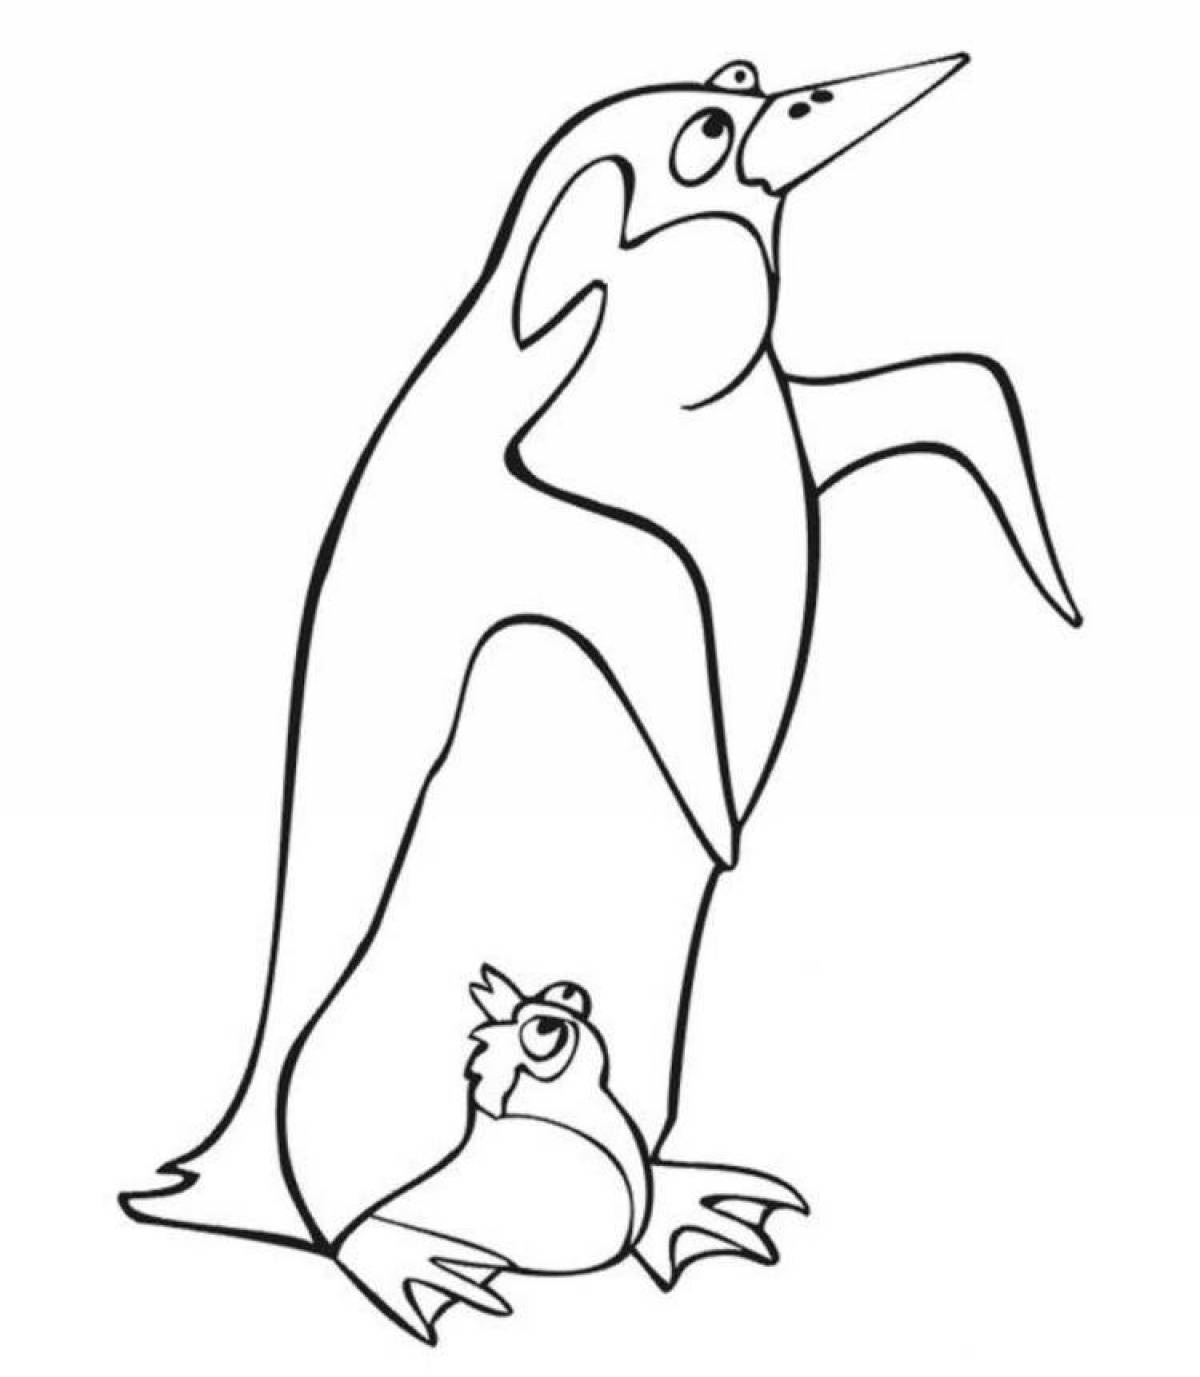 Colorful Arctic Tern Coloring Page